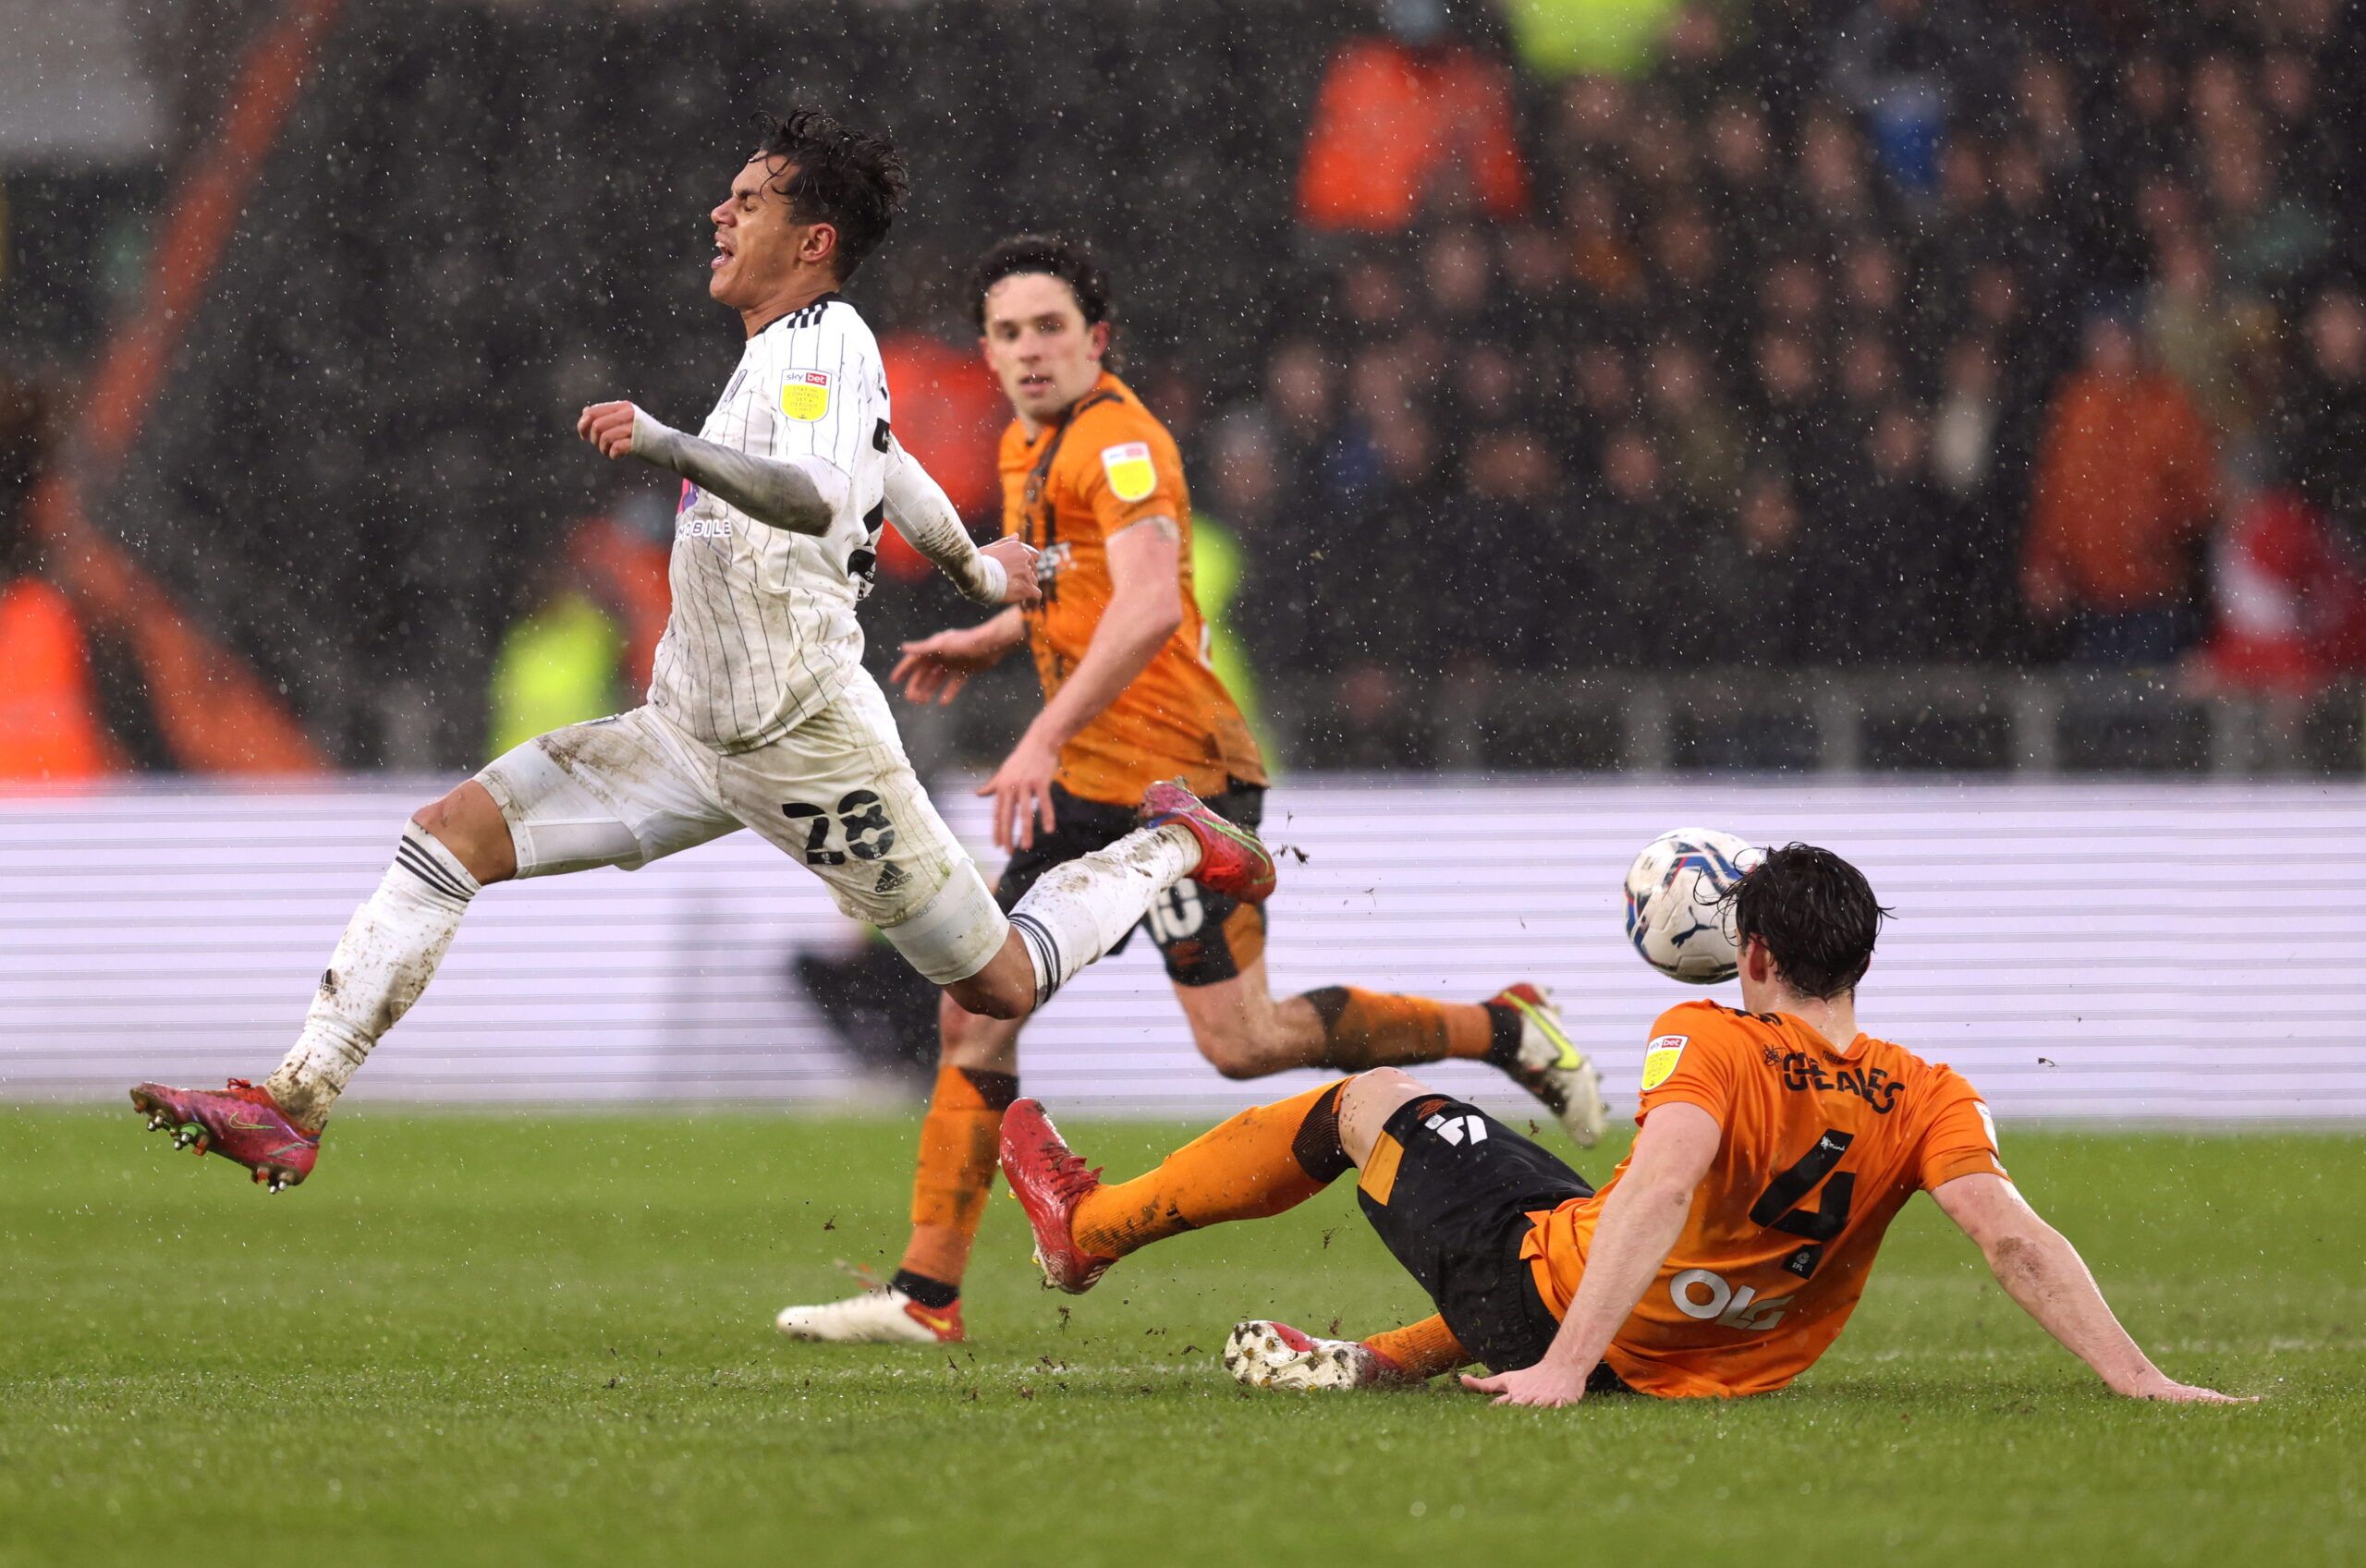 Soccer Football - Championship - Hull City v Fulham - KCOM Stadium, Hull, Britain - February 12, 2022  Fulham's Fabio Carvalho in action with Hull City's Jacob Greaves  Action Images/John Clifton  EDITORIAL USE ONLY. No use with unauthorized audio, video, data, fixture lists, club/league logos or 